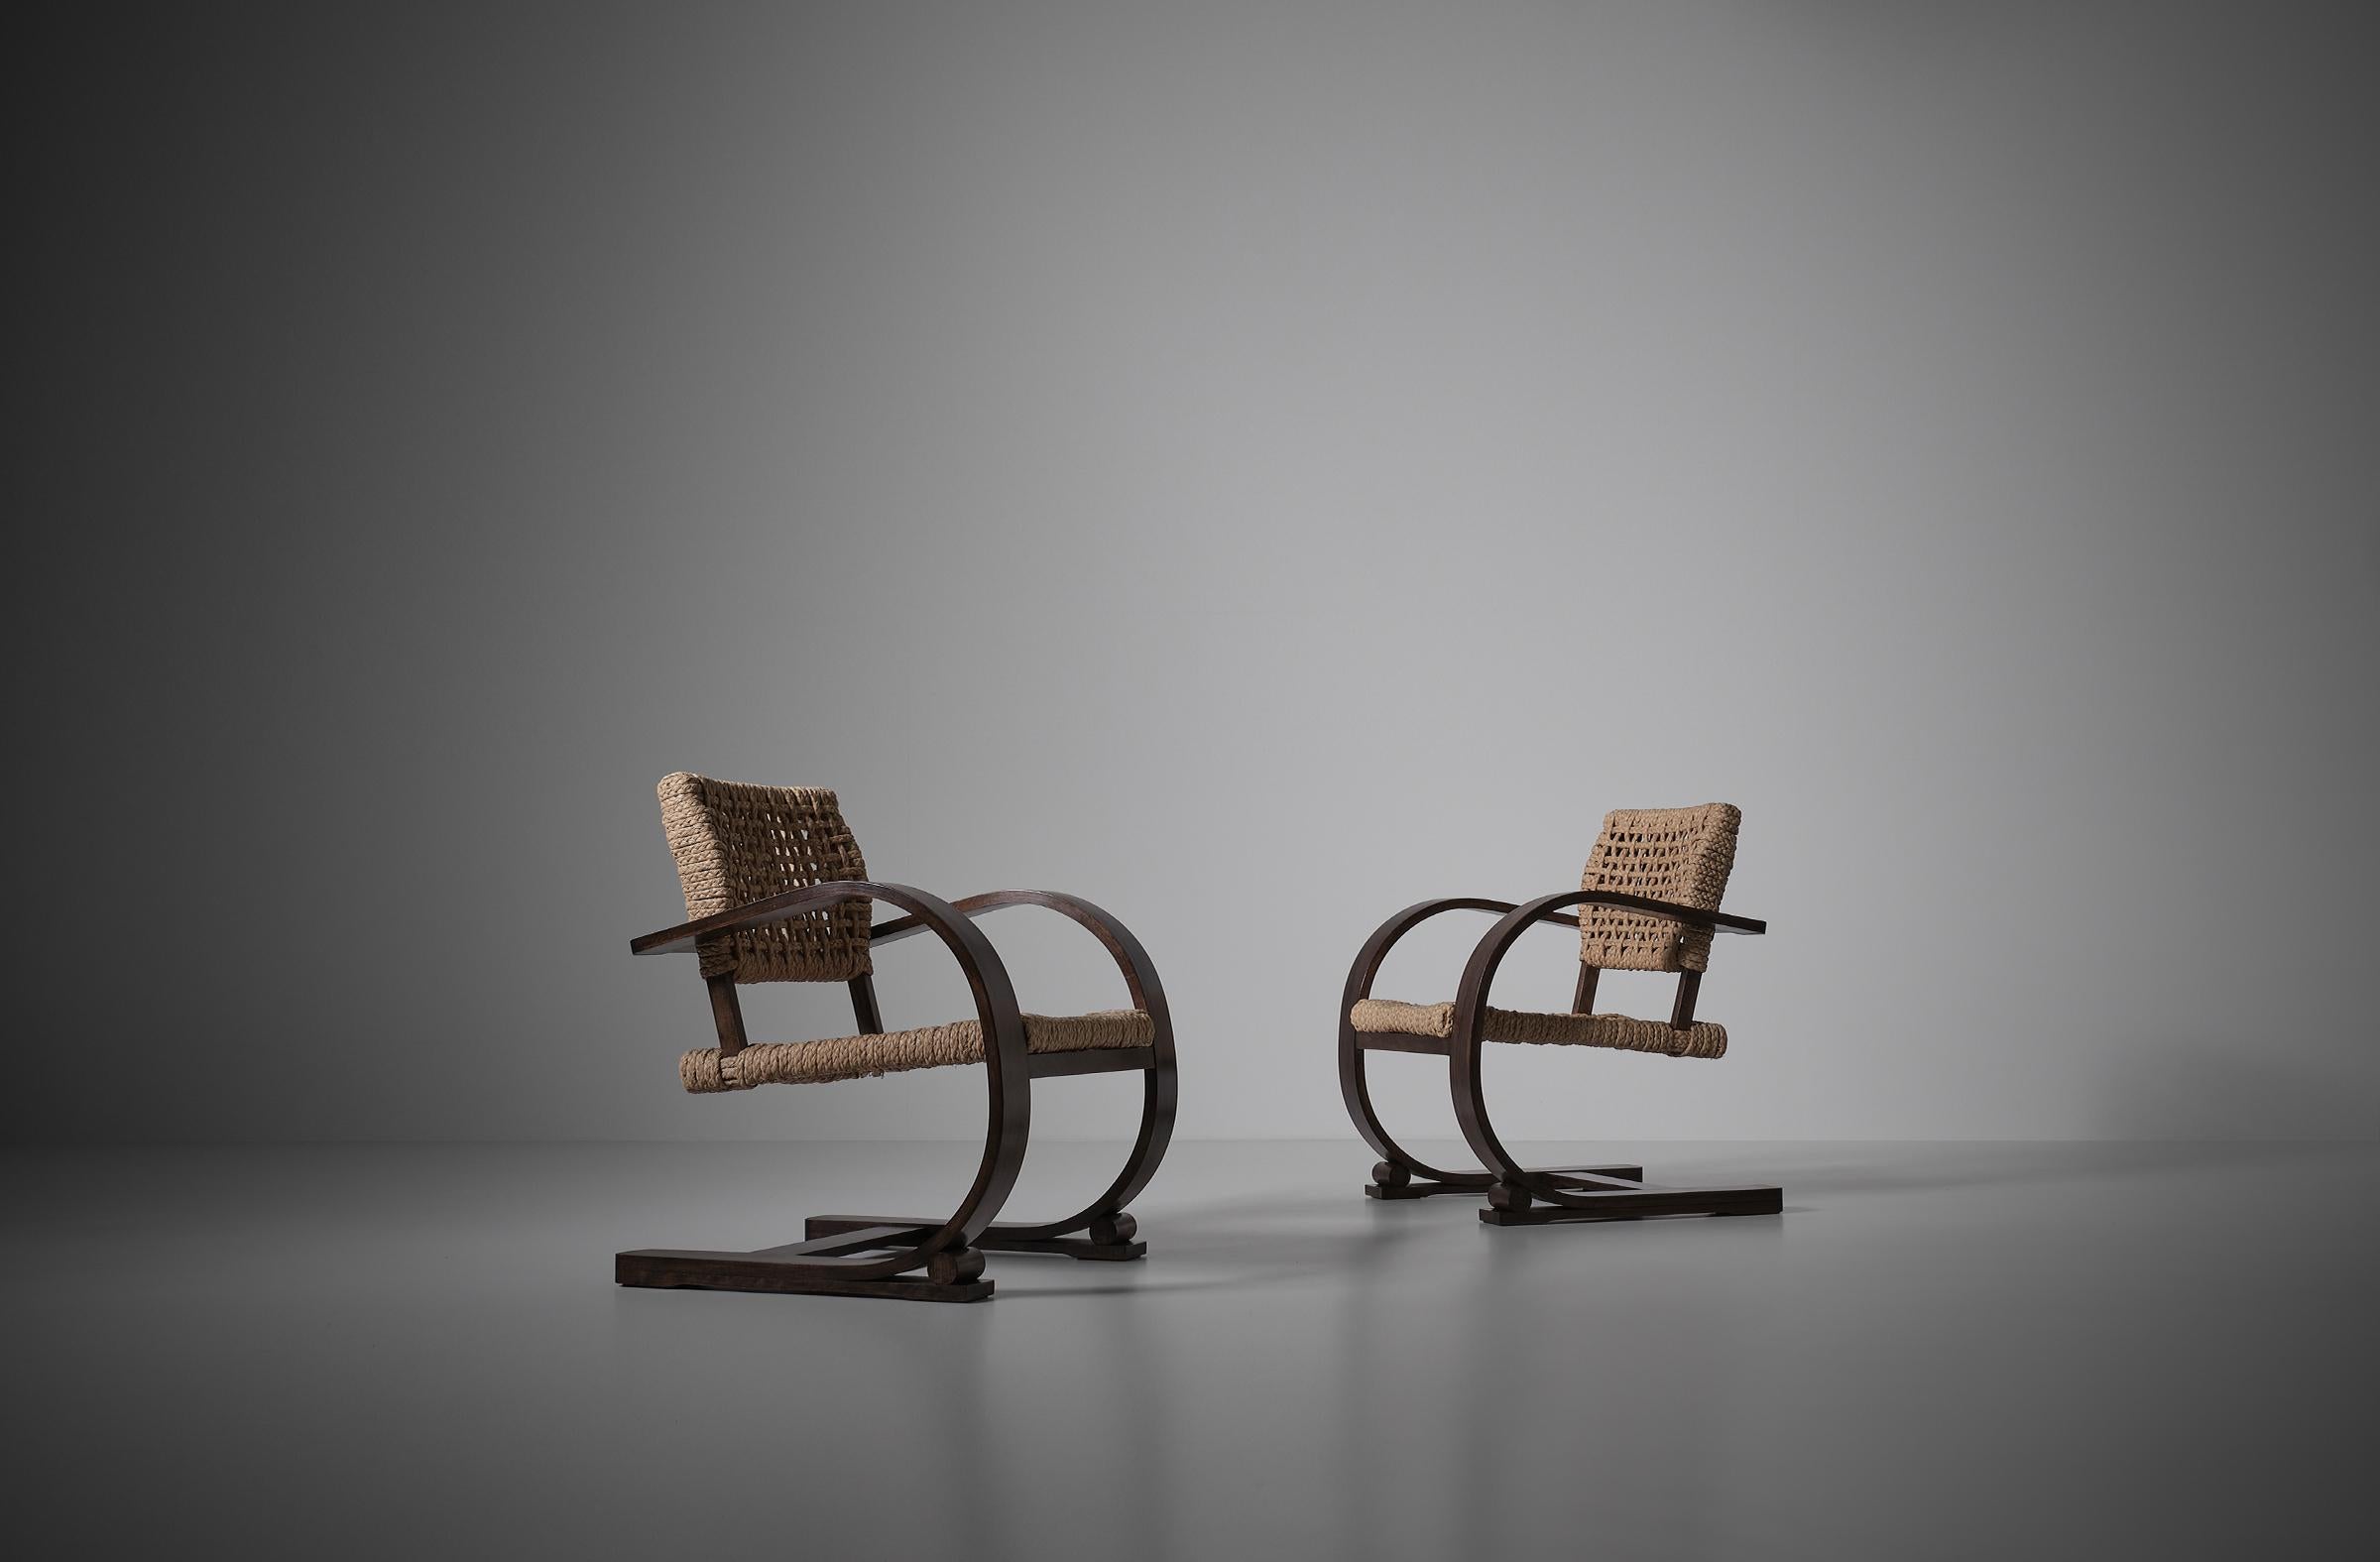 Hand-Knotted Audoux & Minet Rope Chairs for Vibo Vesoul, France